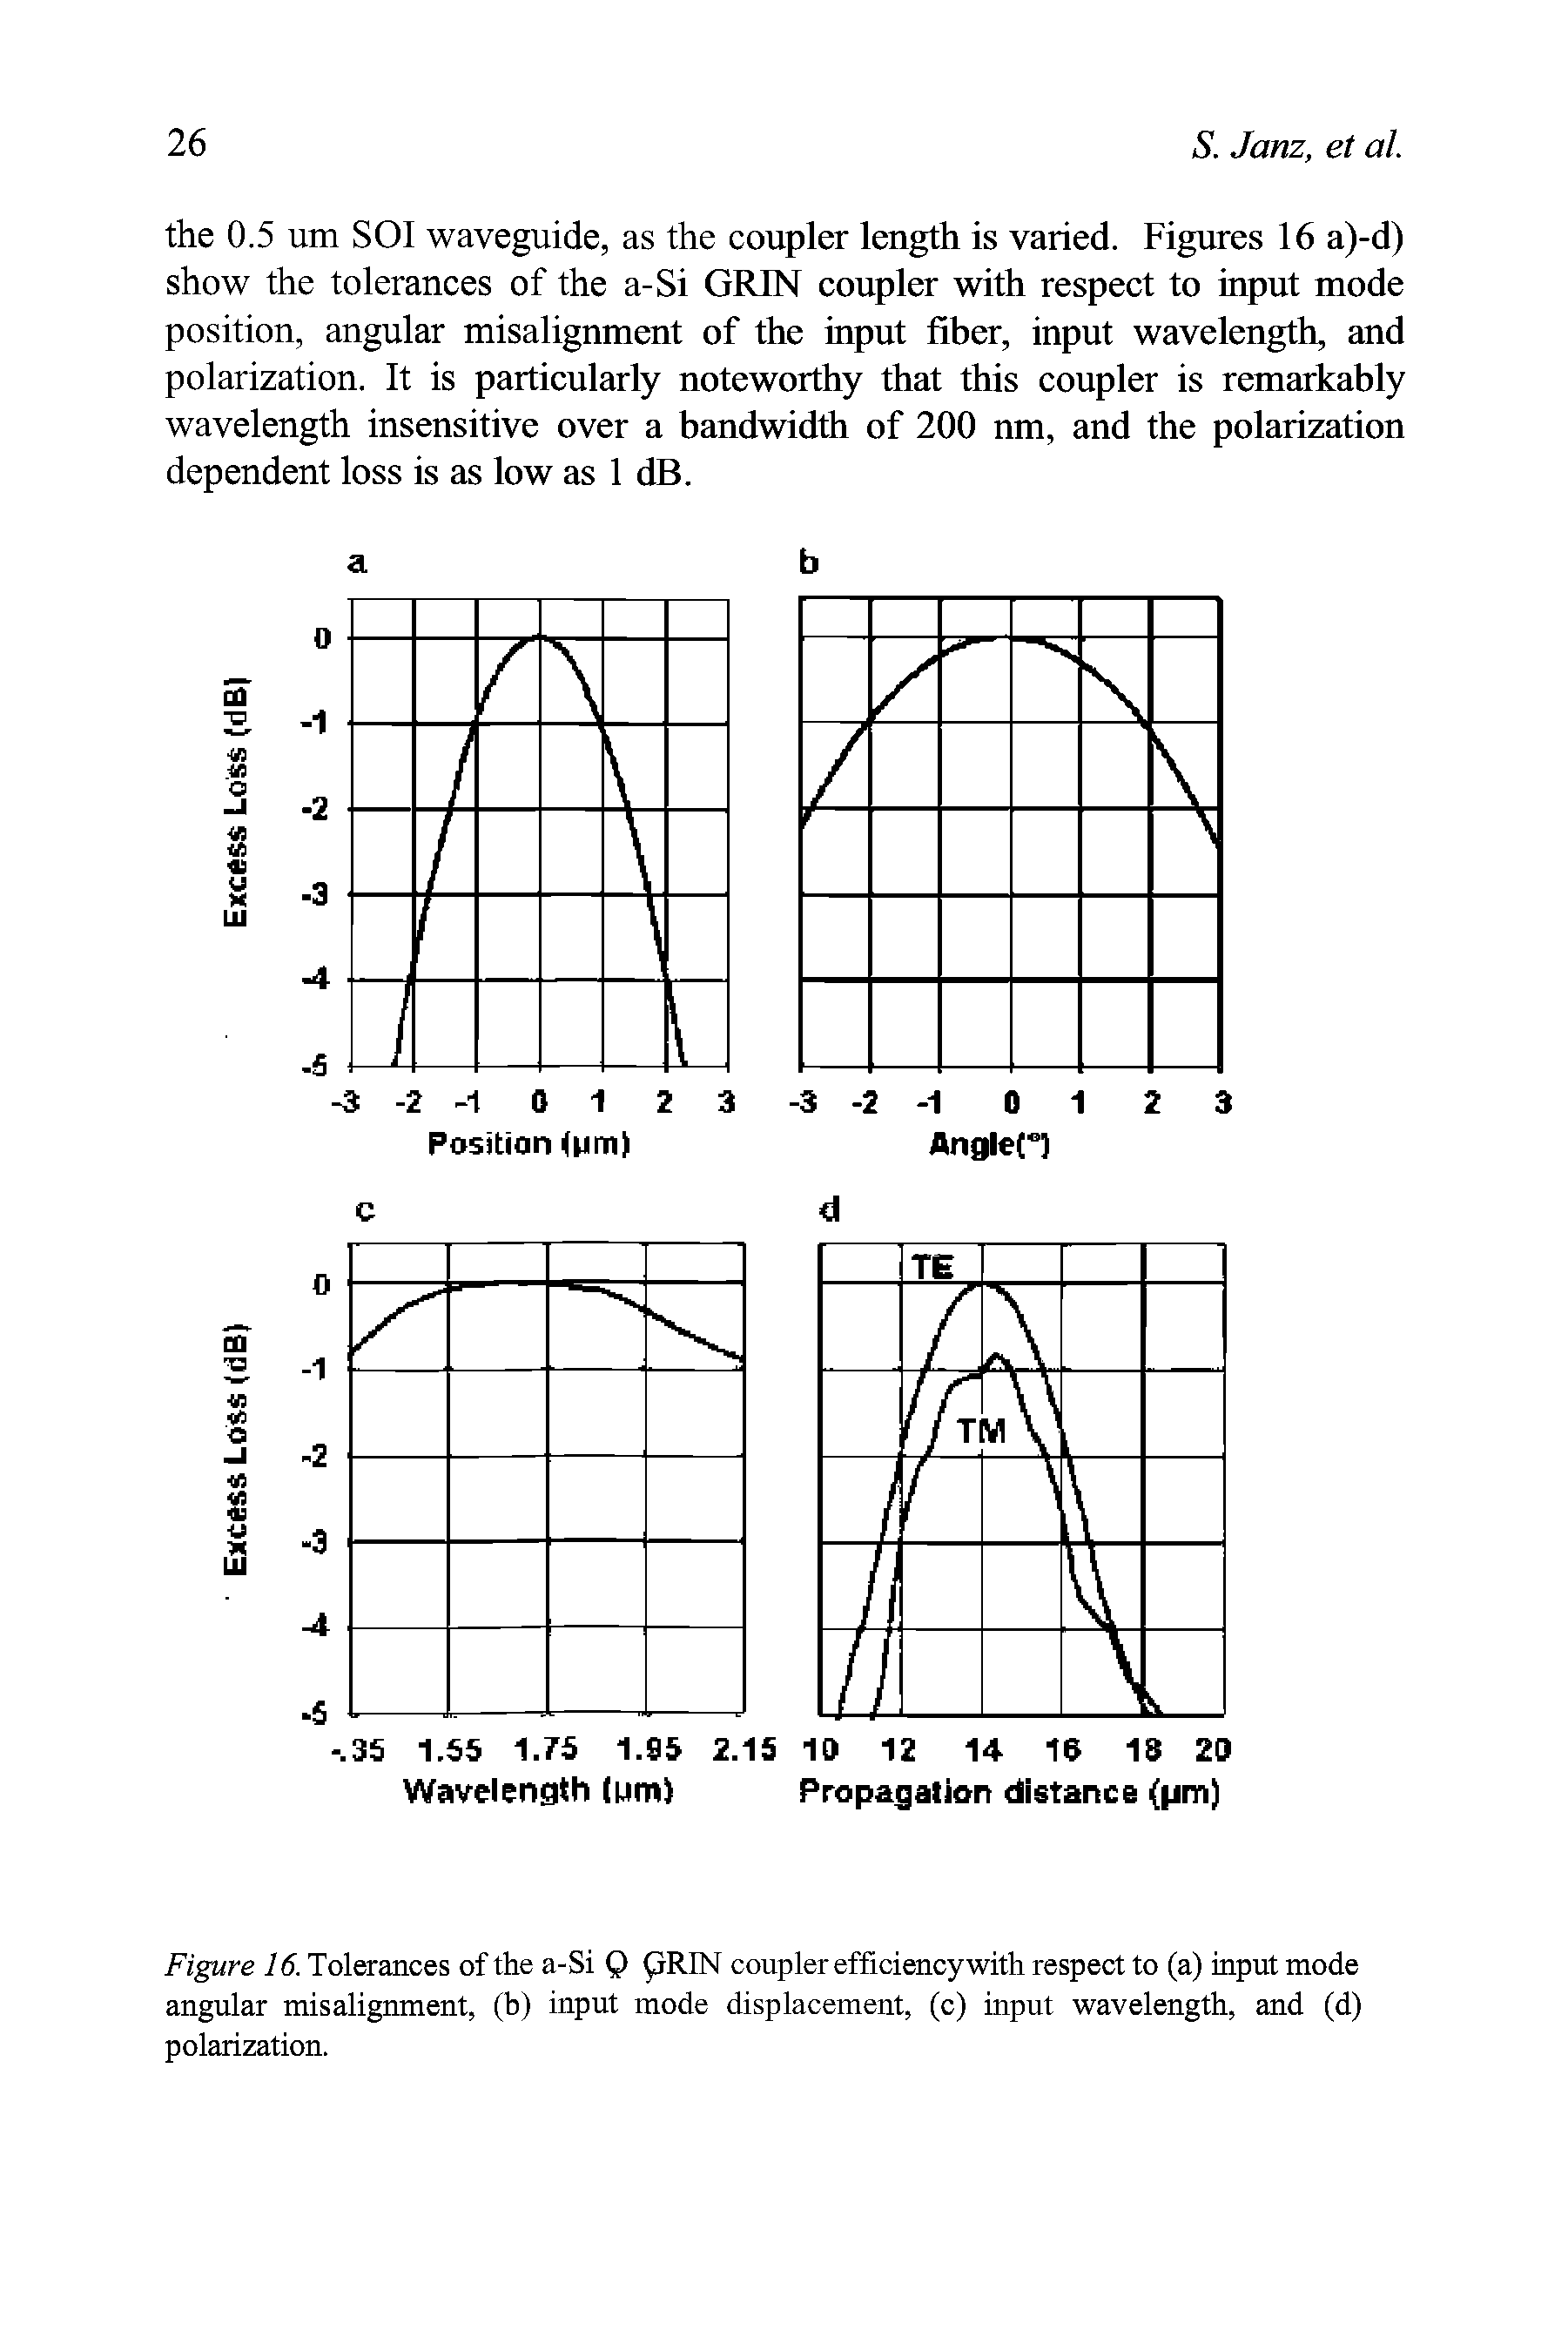 Figure 16. Tolerances of the a-Si Q (jRIN coupler efficiency with respect to (a) input mode angular misalignment, (h) input mode displacement, (c) input wavelength, and (d) polarization.